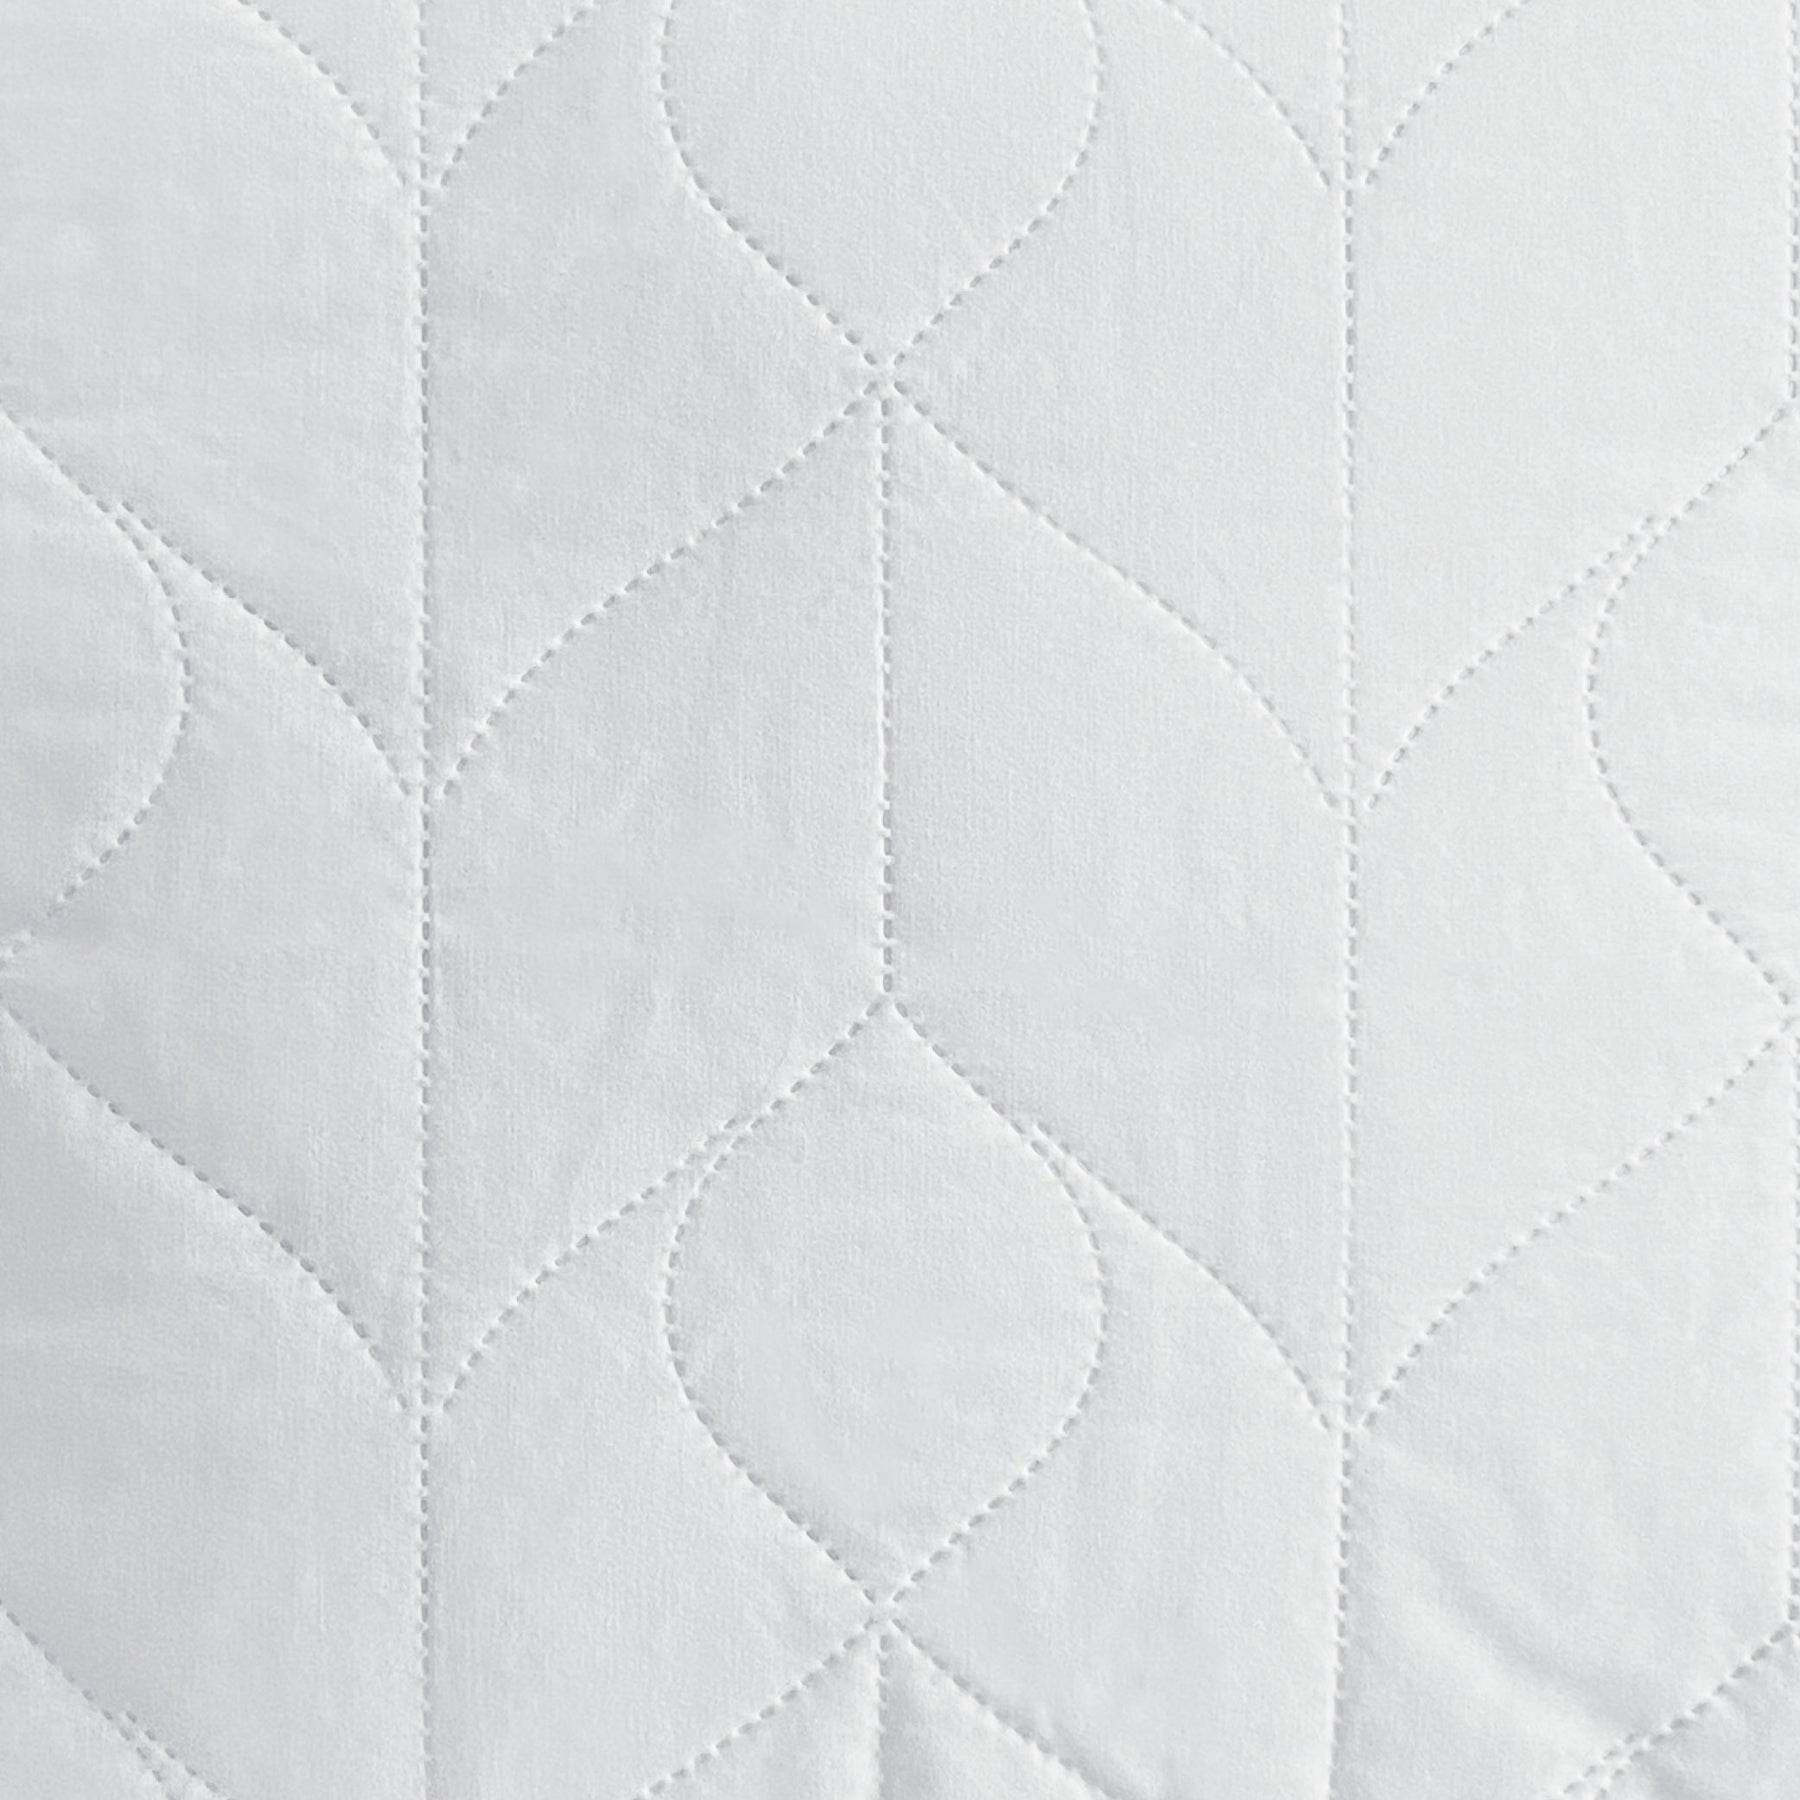 Close-up image of the quilted fabric on the Quilted Pillow Insert cover